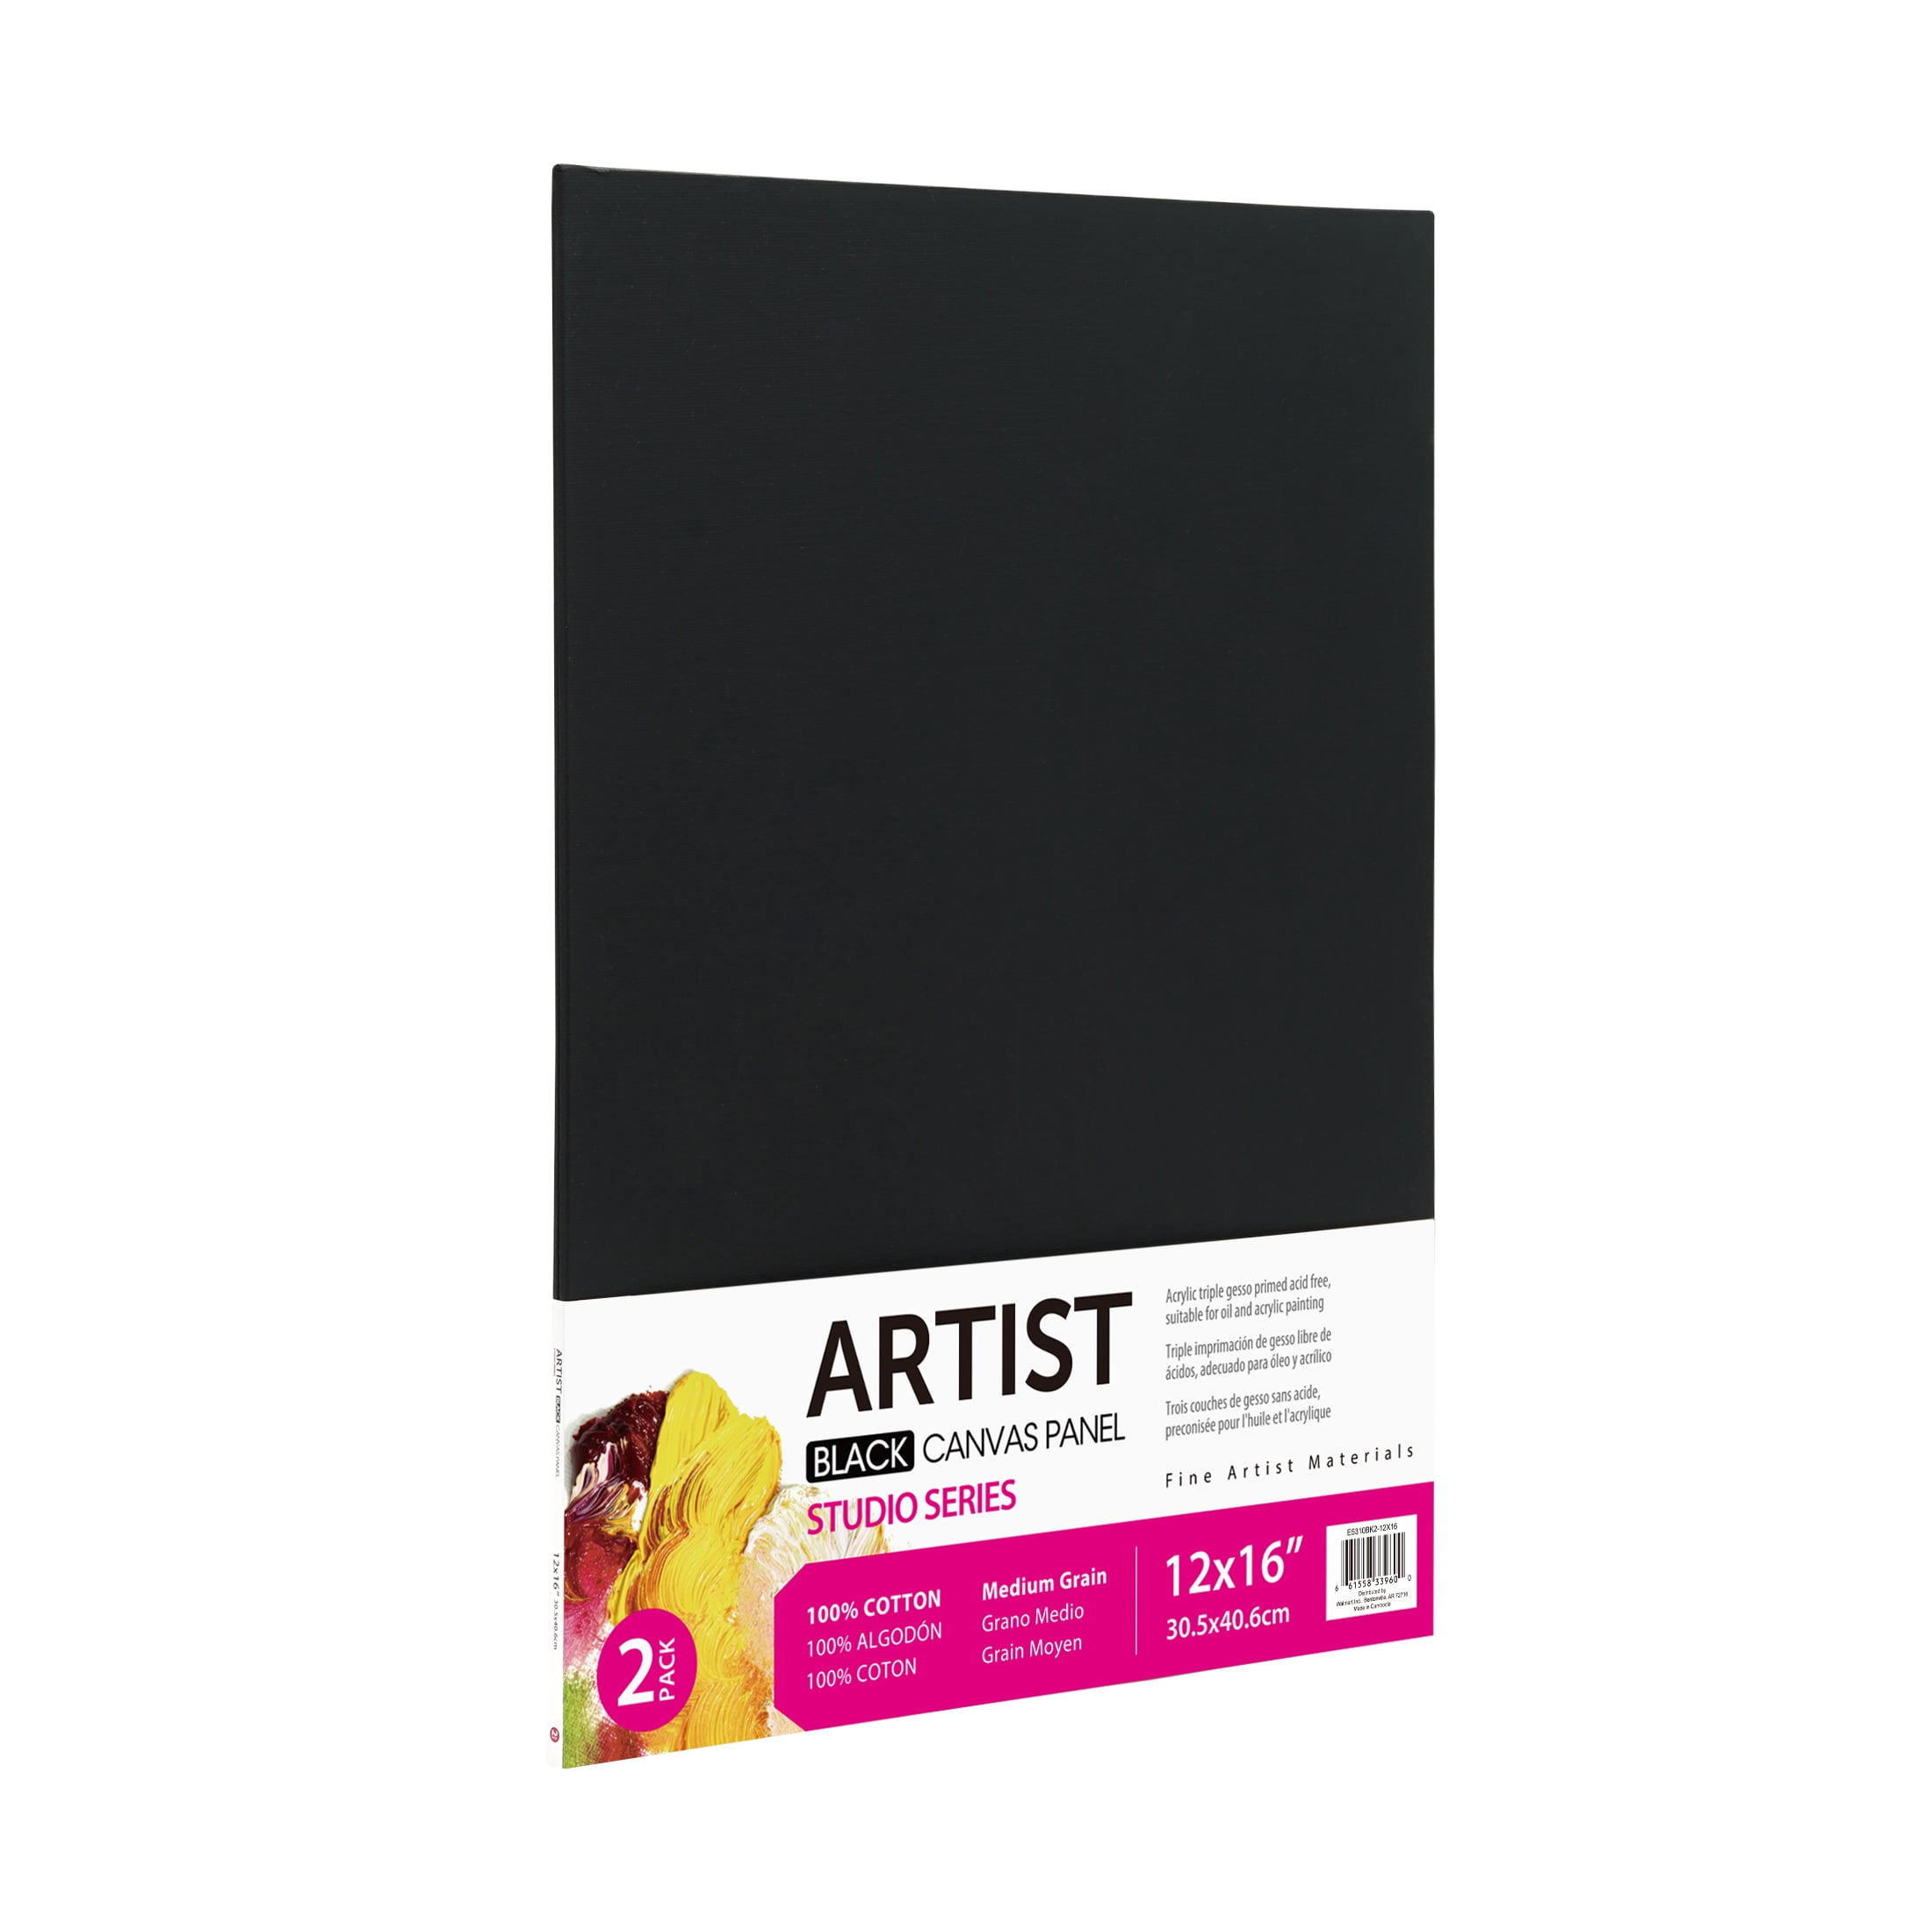 Gredak Black Canvases for Painting, 12x16 Inch 6-Pack Blank Black Canvas,  100% Cotton Stretched Canvas, Paint Supplies for Adult, Perfect Art  Supplies